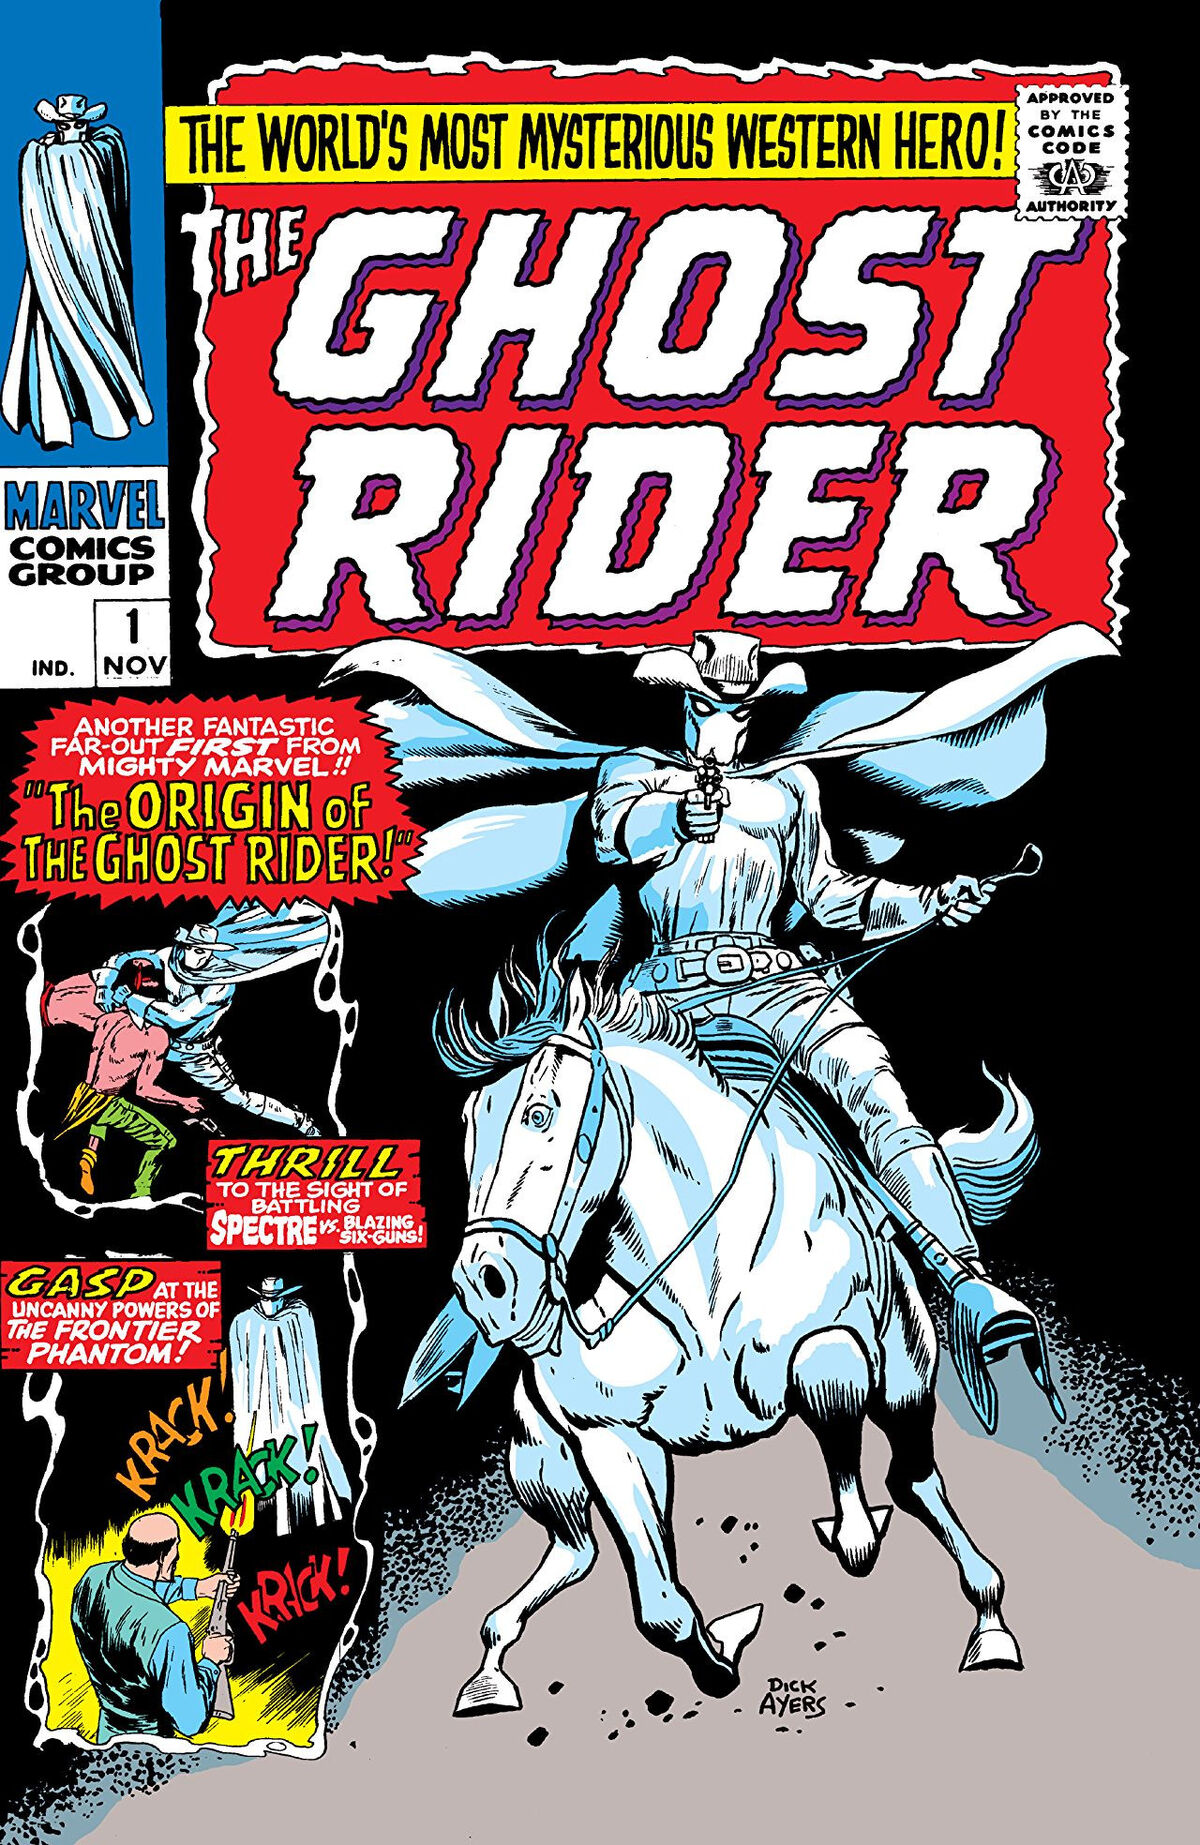 ghost rider 2 cover for facebook